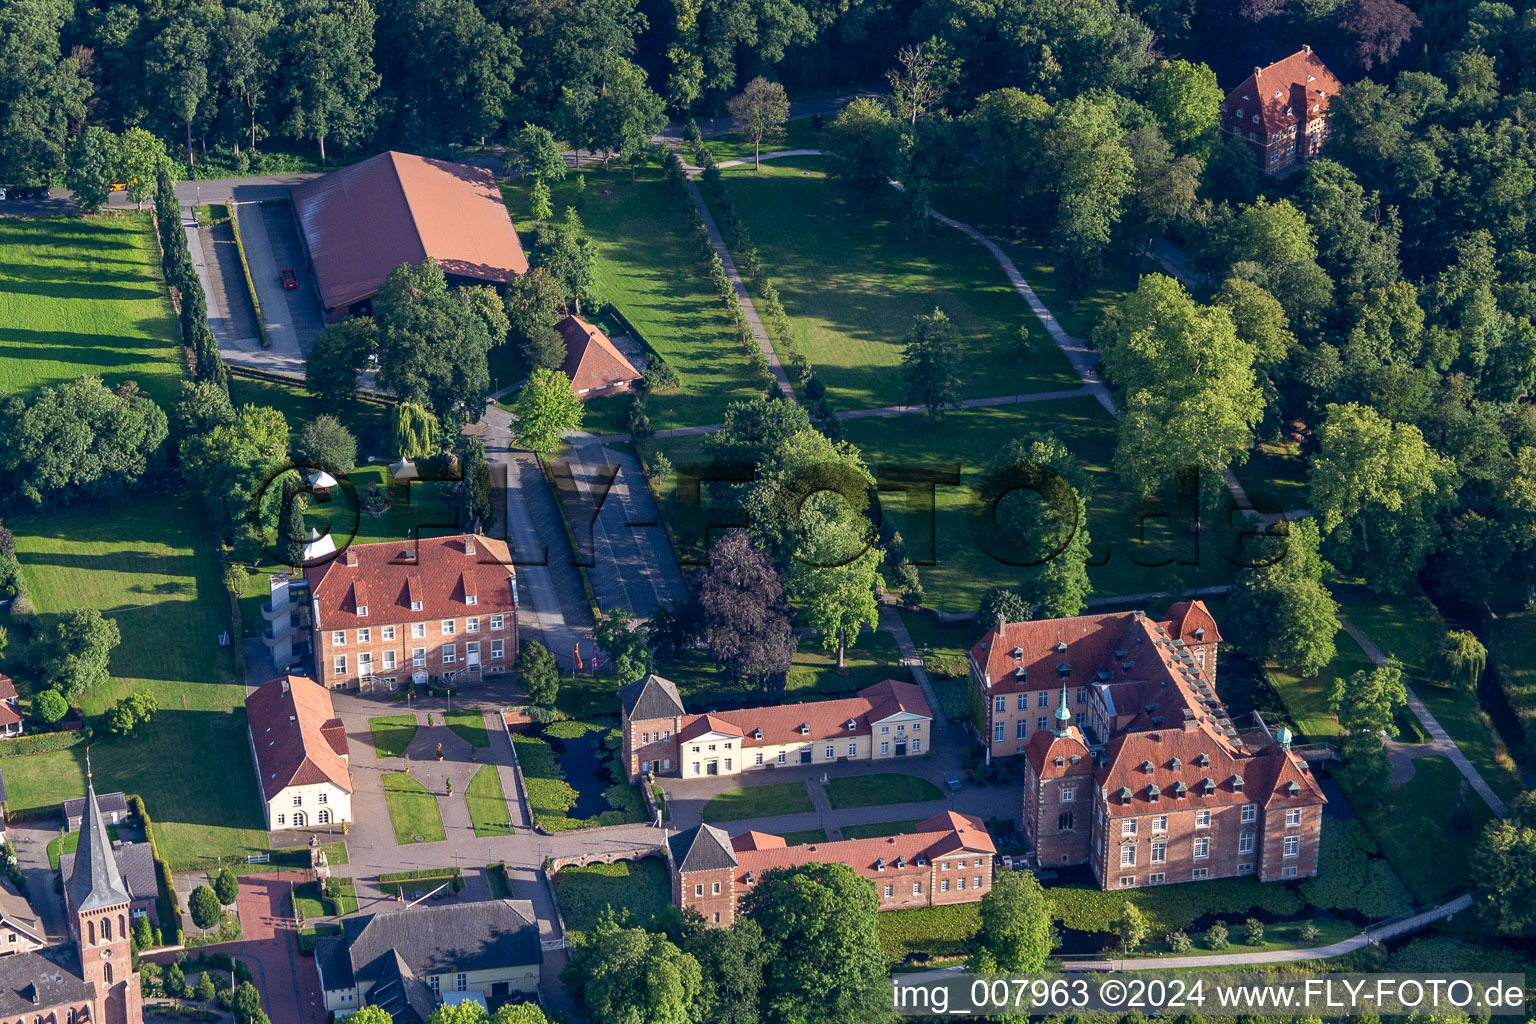 Aerial view of Building complex of the education and training center " Chateauform - Schloss Velen " in Velen in the state North Rhine-Westphalia, Germany